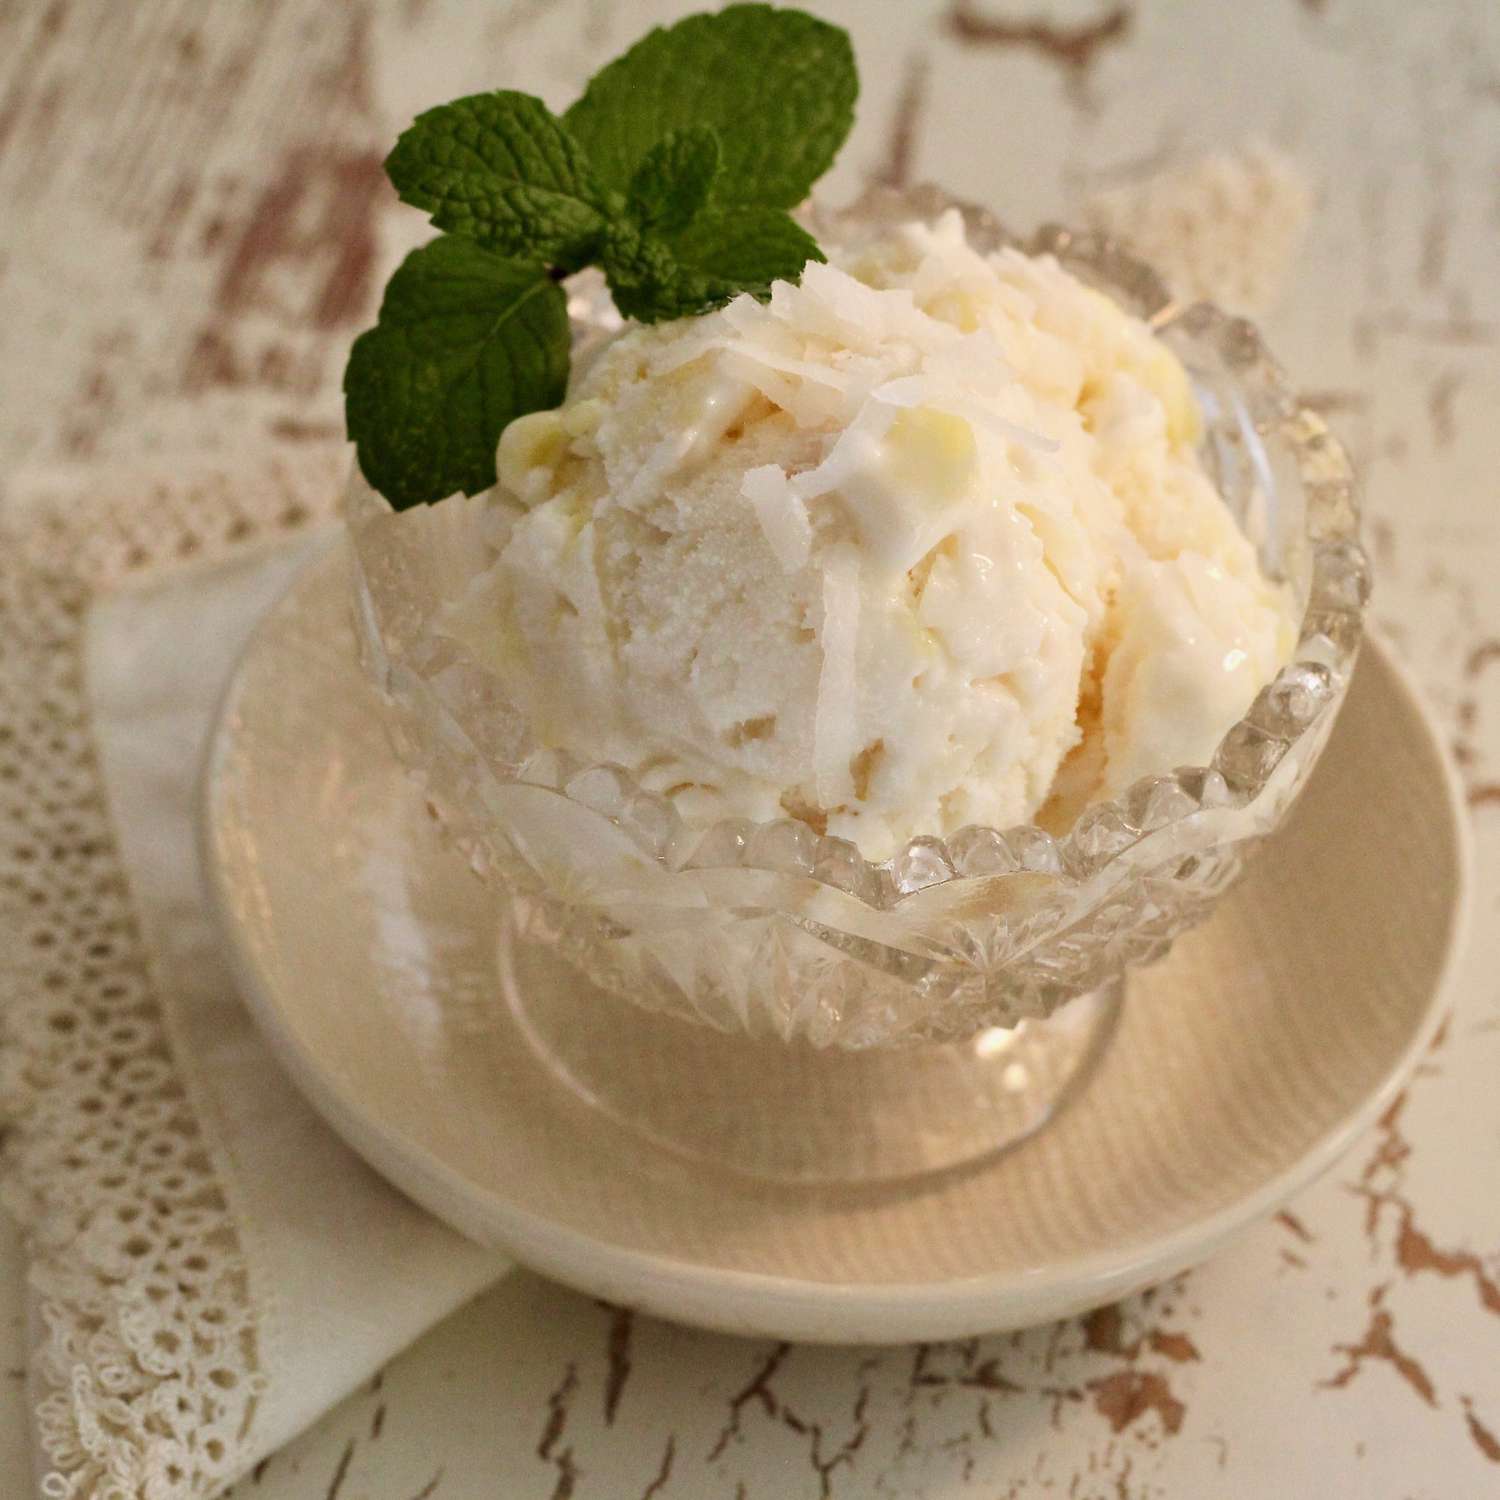 Coconut-Pineapple Ice Cream in a glass bowl